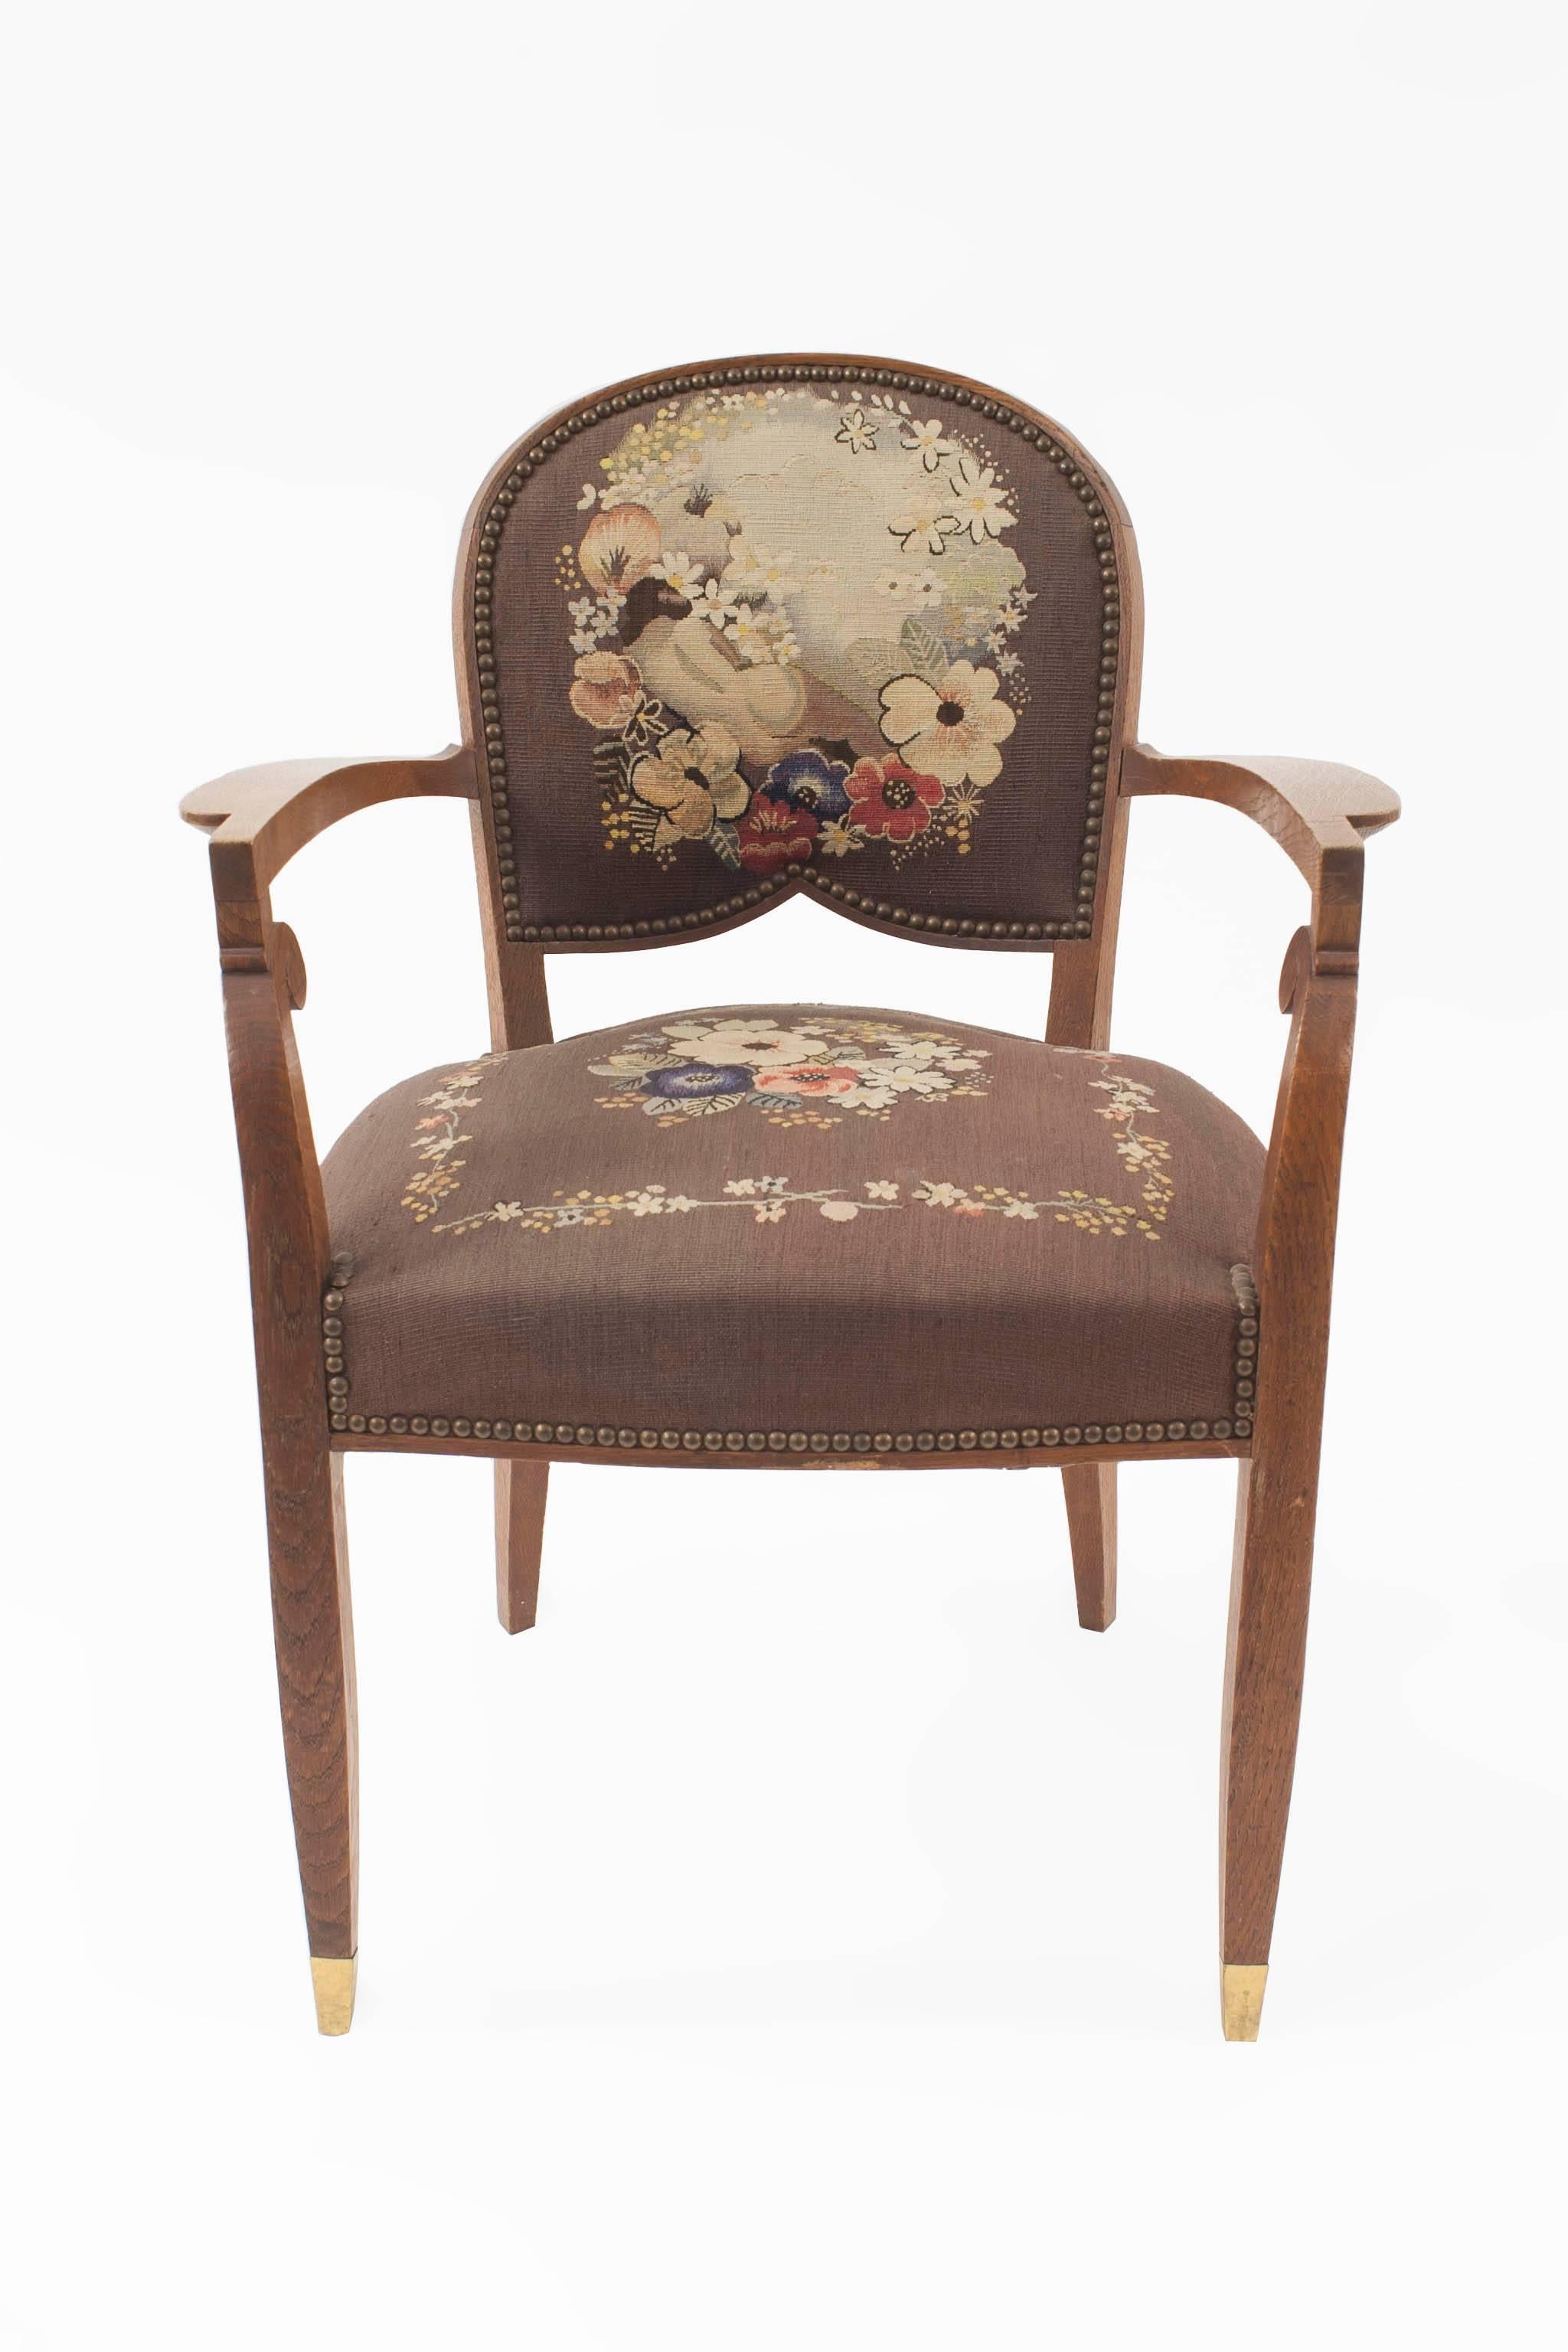 Pair of French Art Deco Armchairs with tapestry upholstery having a round back & scroll design arm (by JULES LELEU) (c.1940) Ref: Decorateurs Ensemble, Francoise Siriex) (similar bergeres: GRL 4554; loveseat CHM007)
